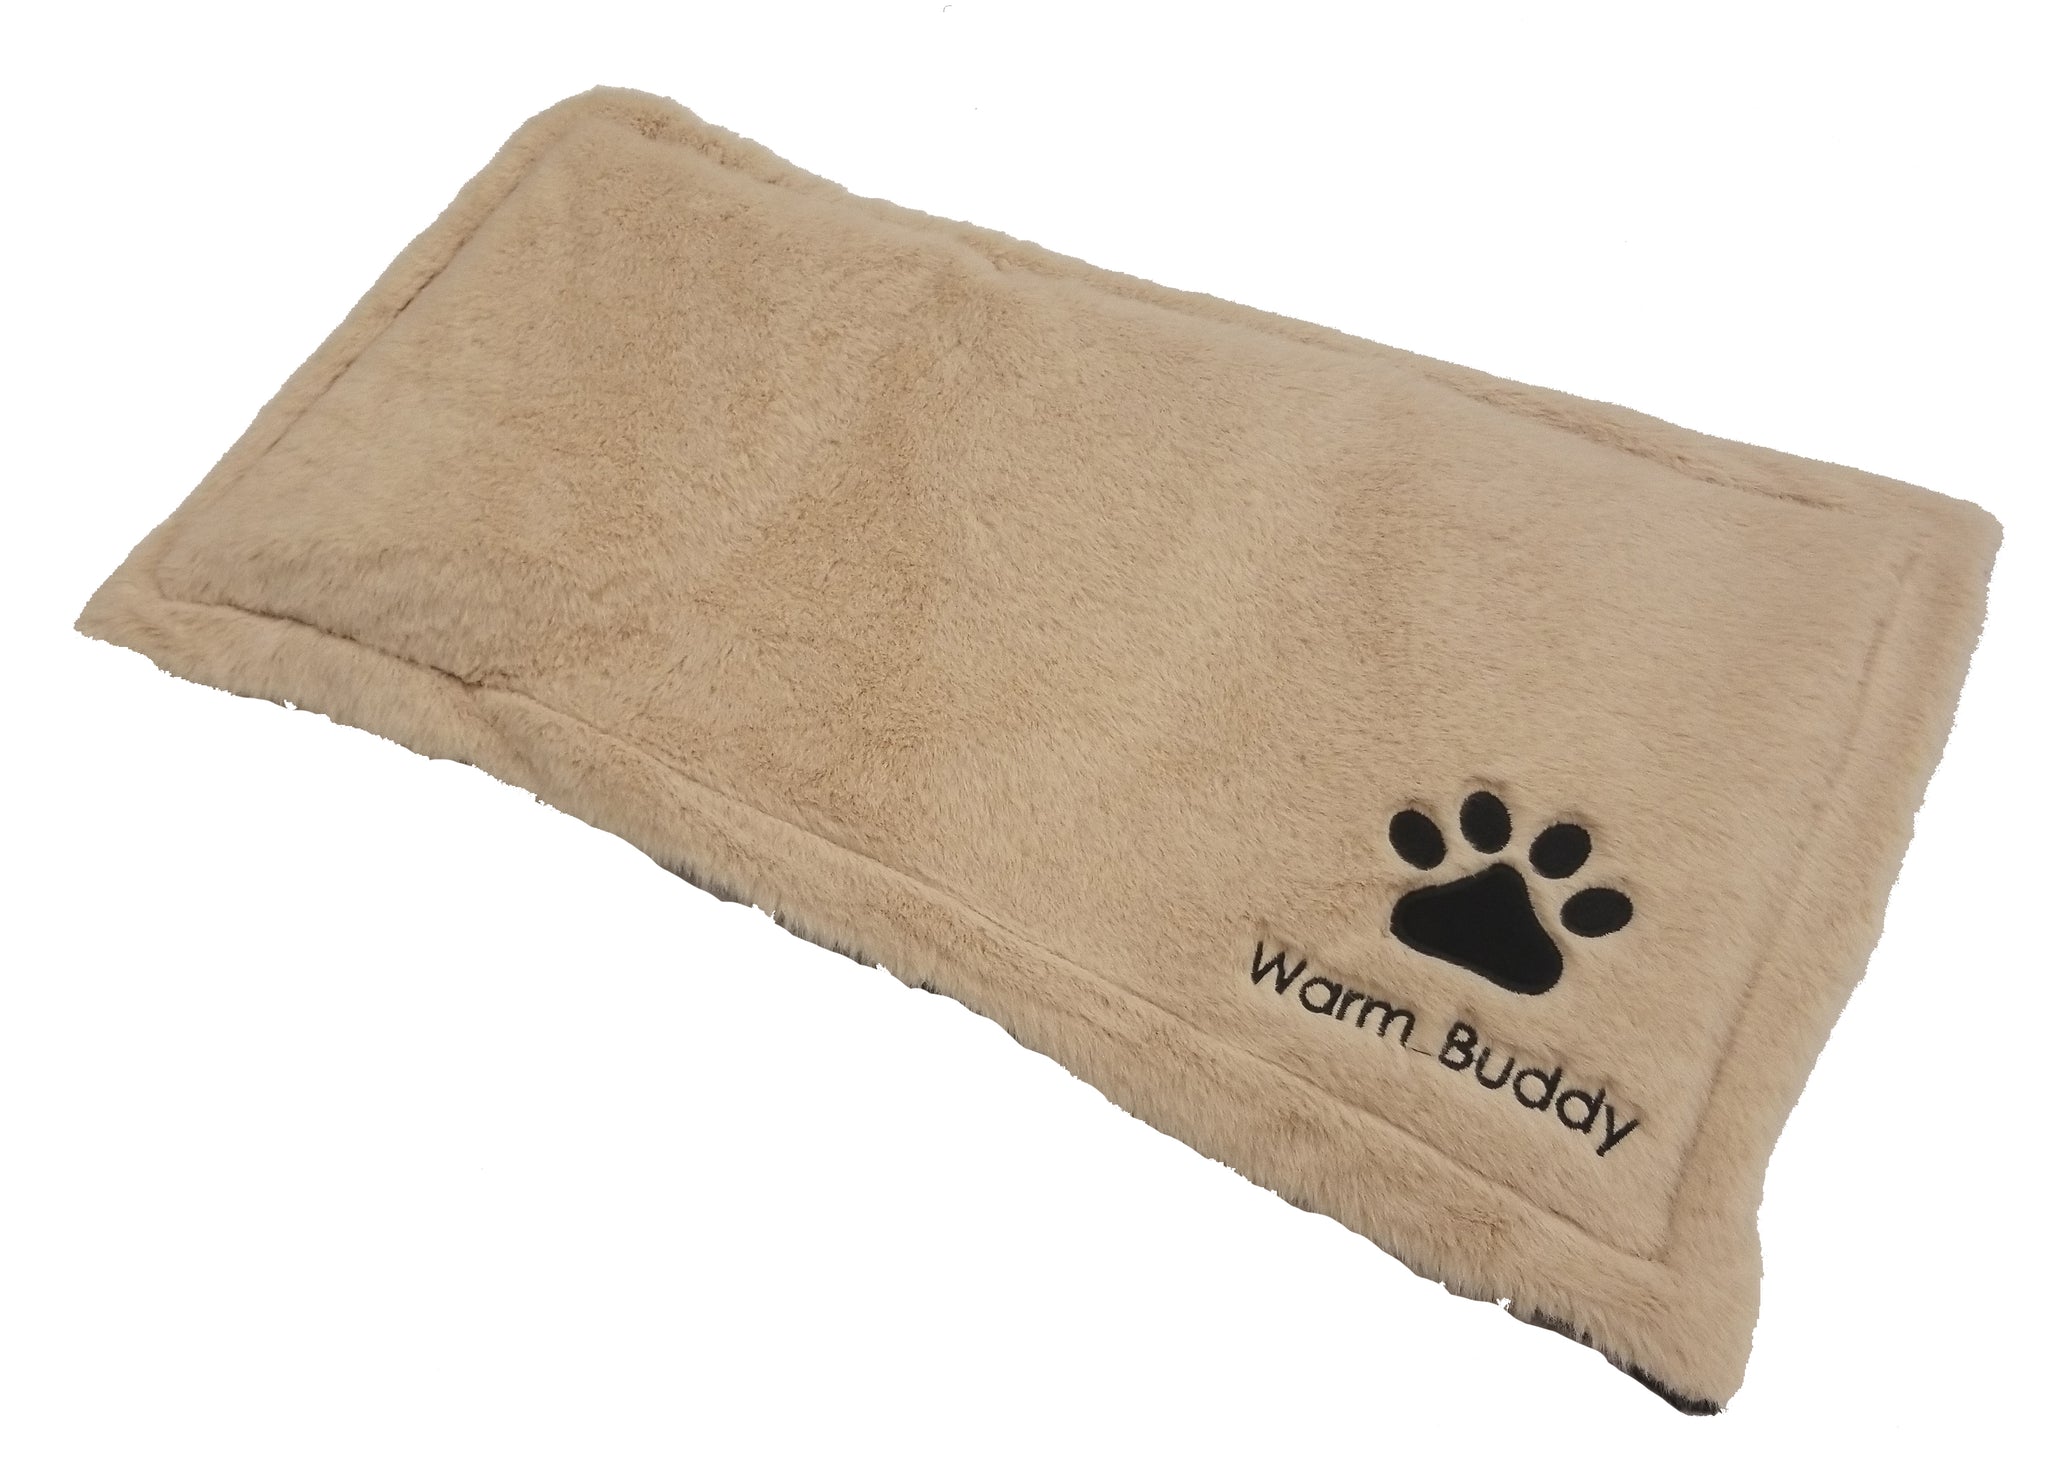 microwave heat pad for pets